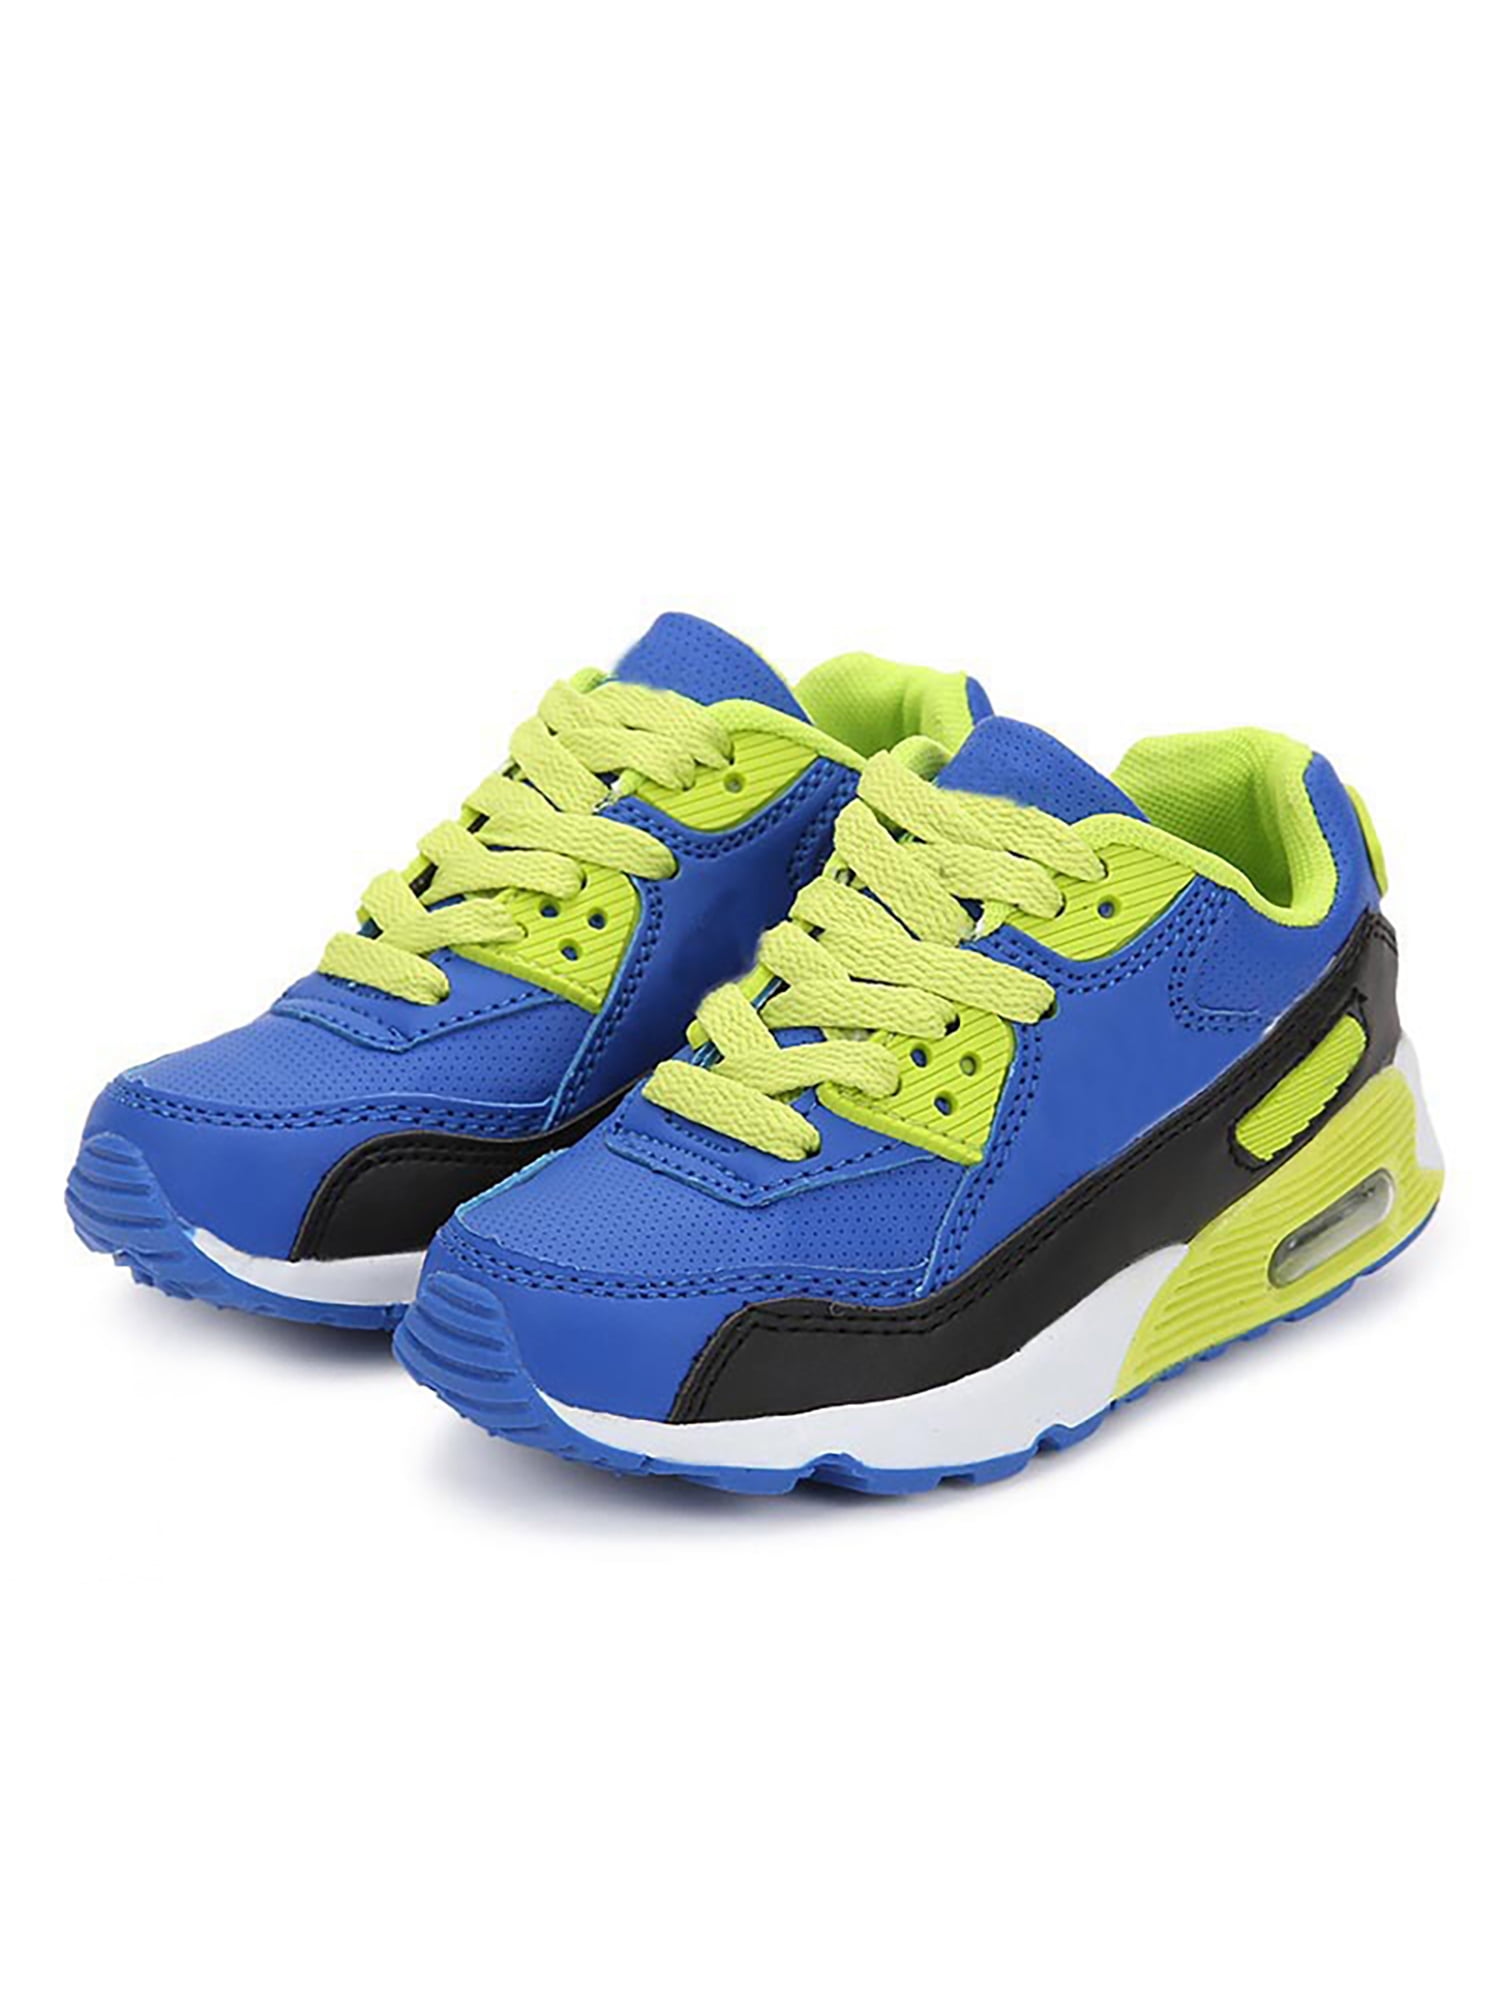 Details about   Fashion Kids Boys Girls Baby Casual School Running Sport Sneakers Athletic Shoes